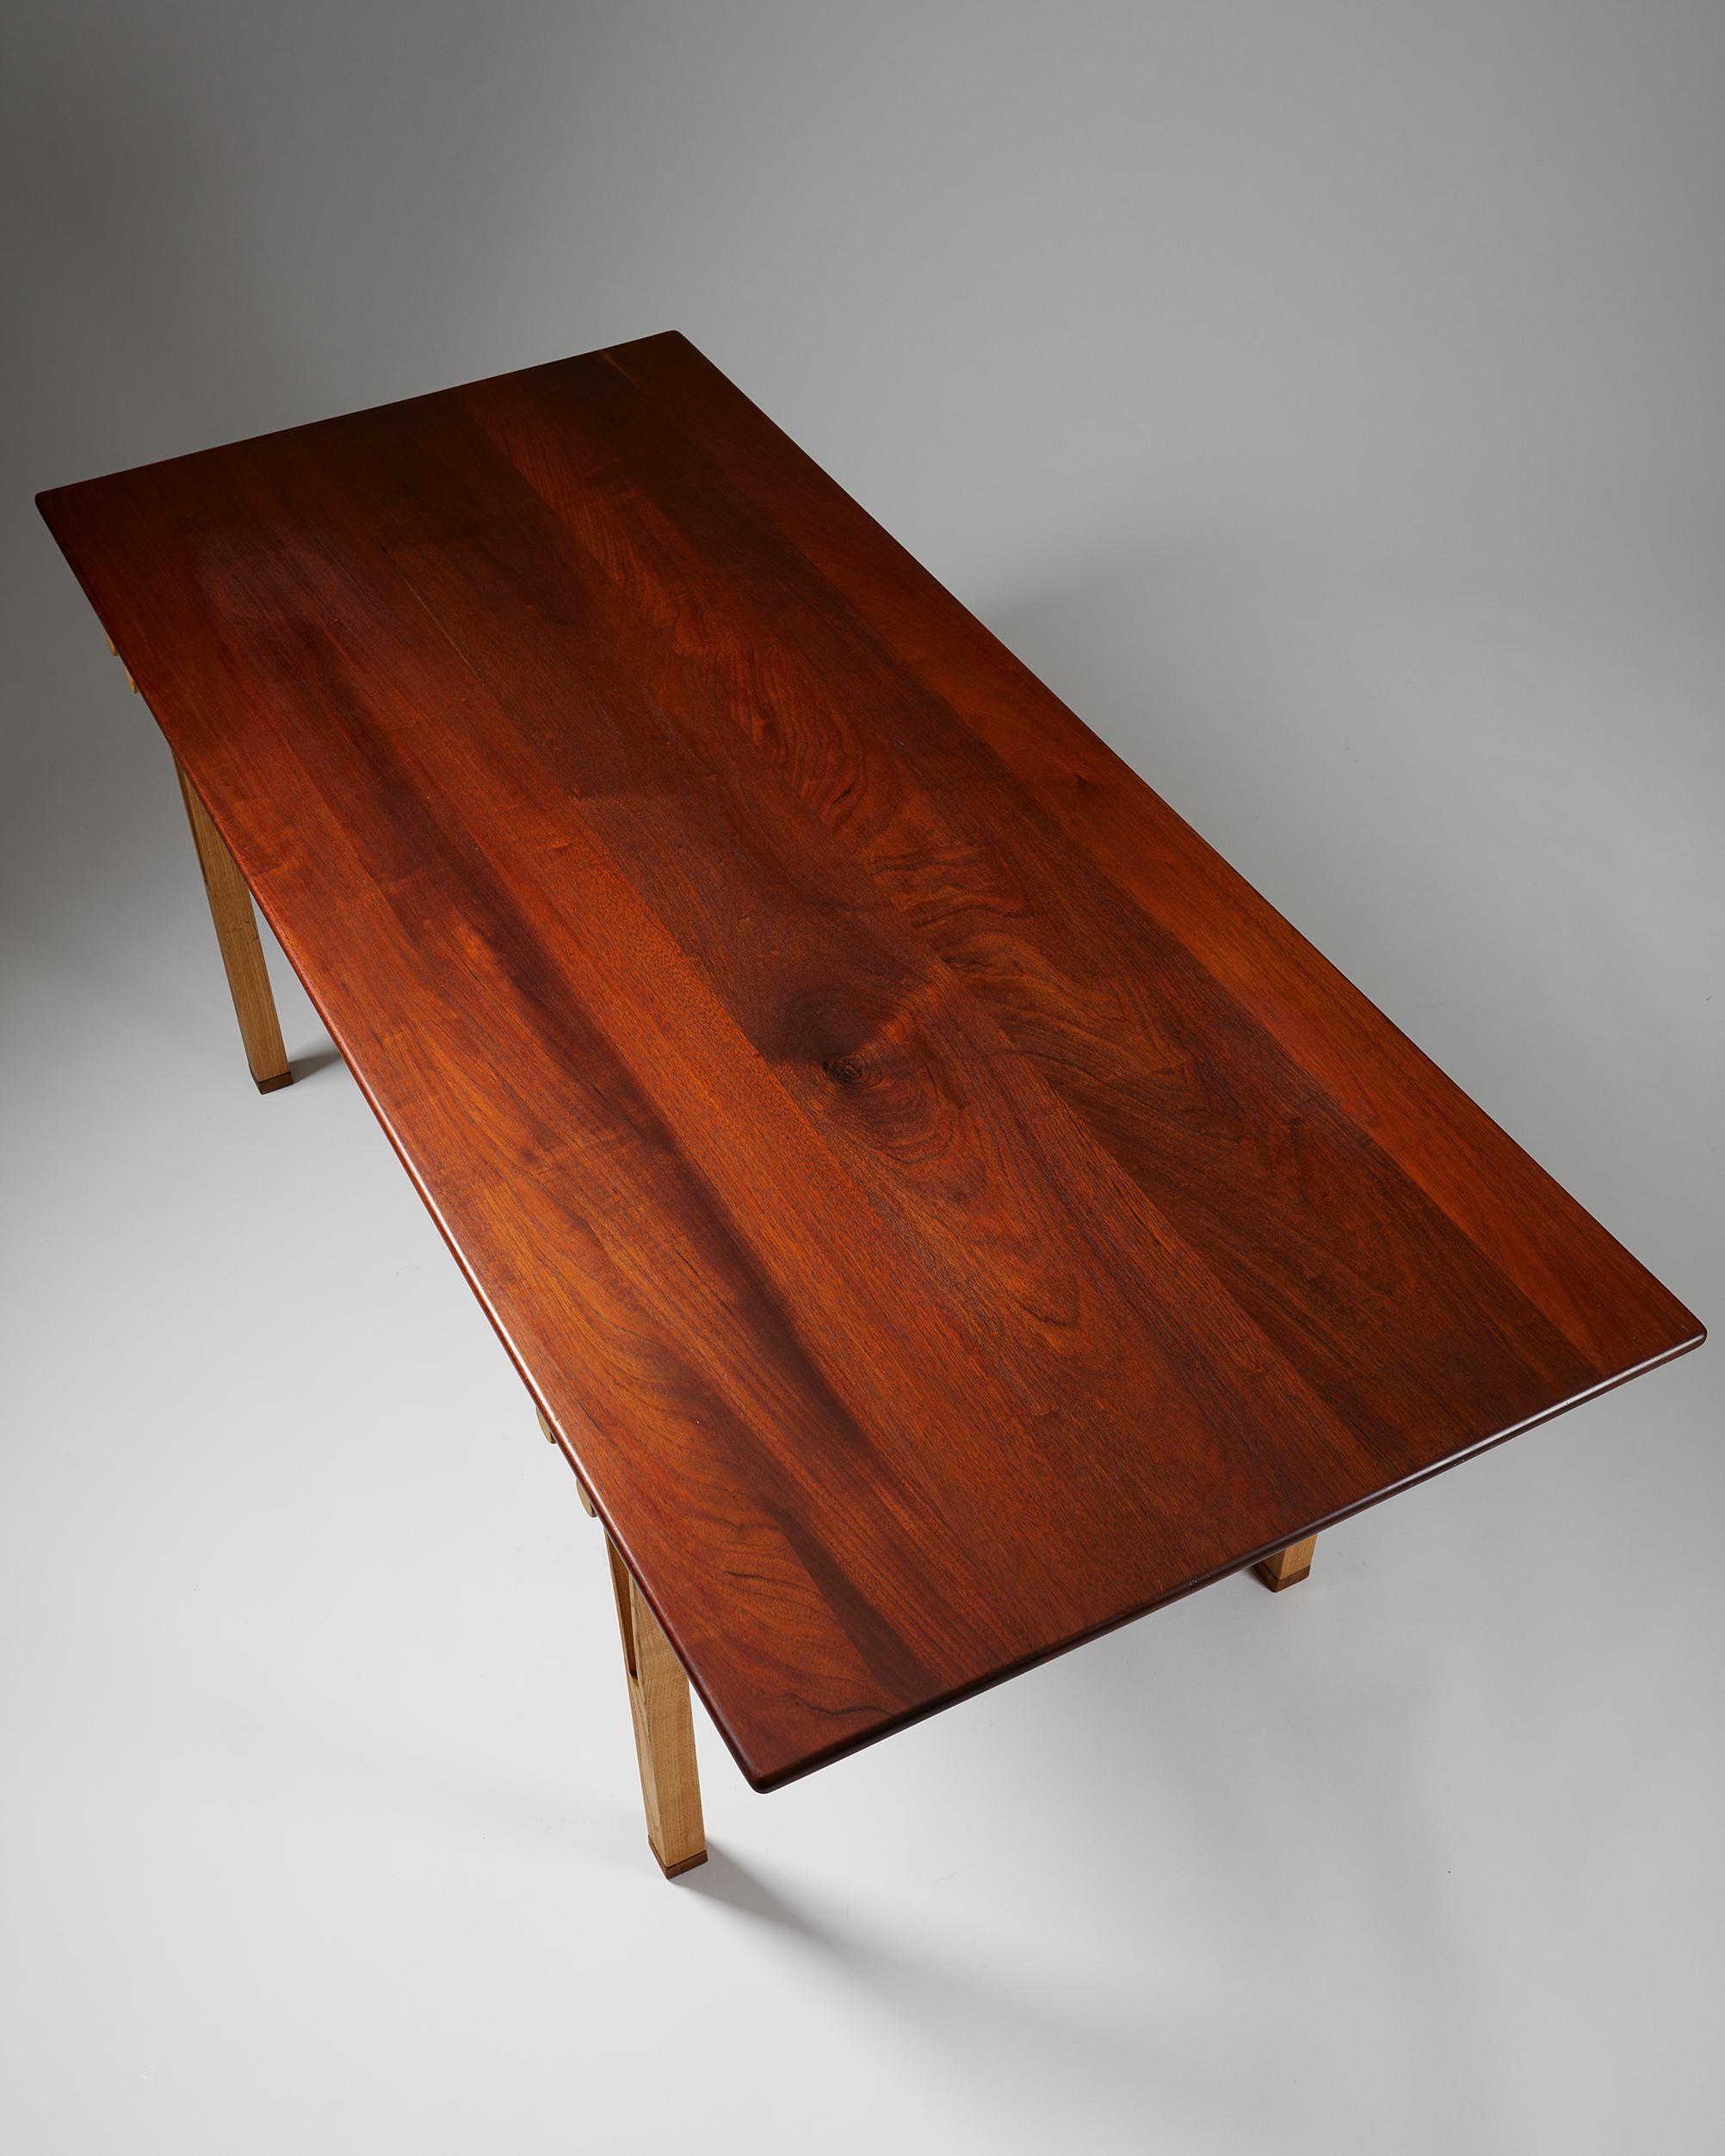 20th Century Dining Table “Ararat” Designed by Åke Axelsson, Sweden, 1960’s For Sale